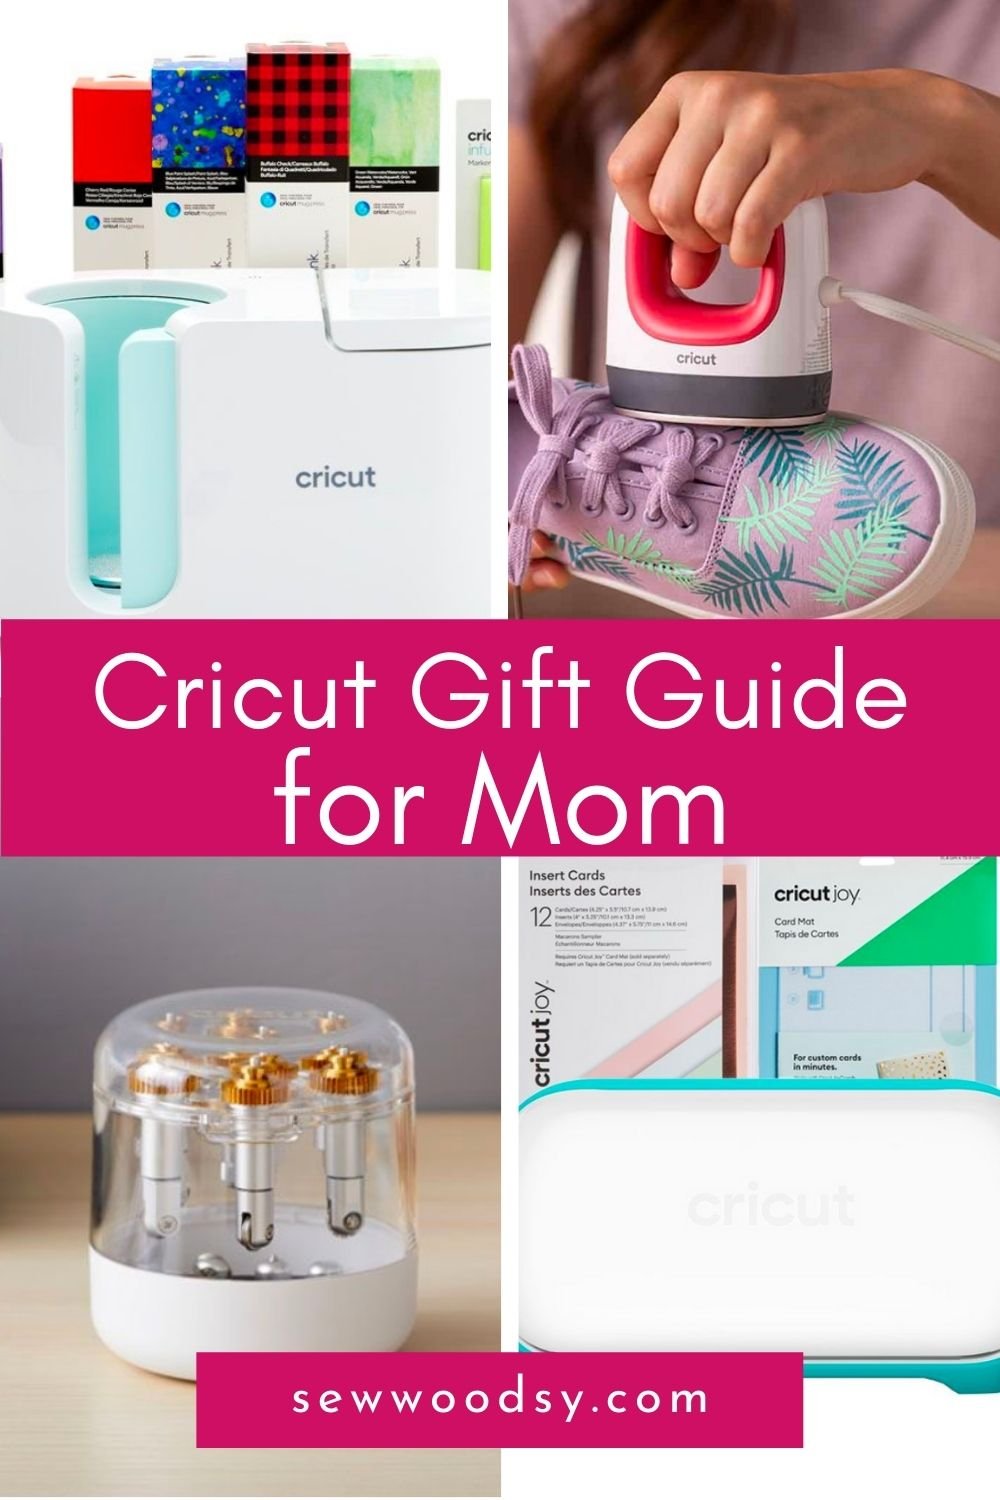 Four Cricut craft items with text on image for Pinterest.